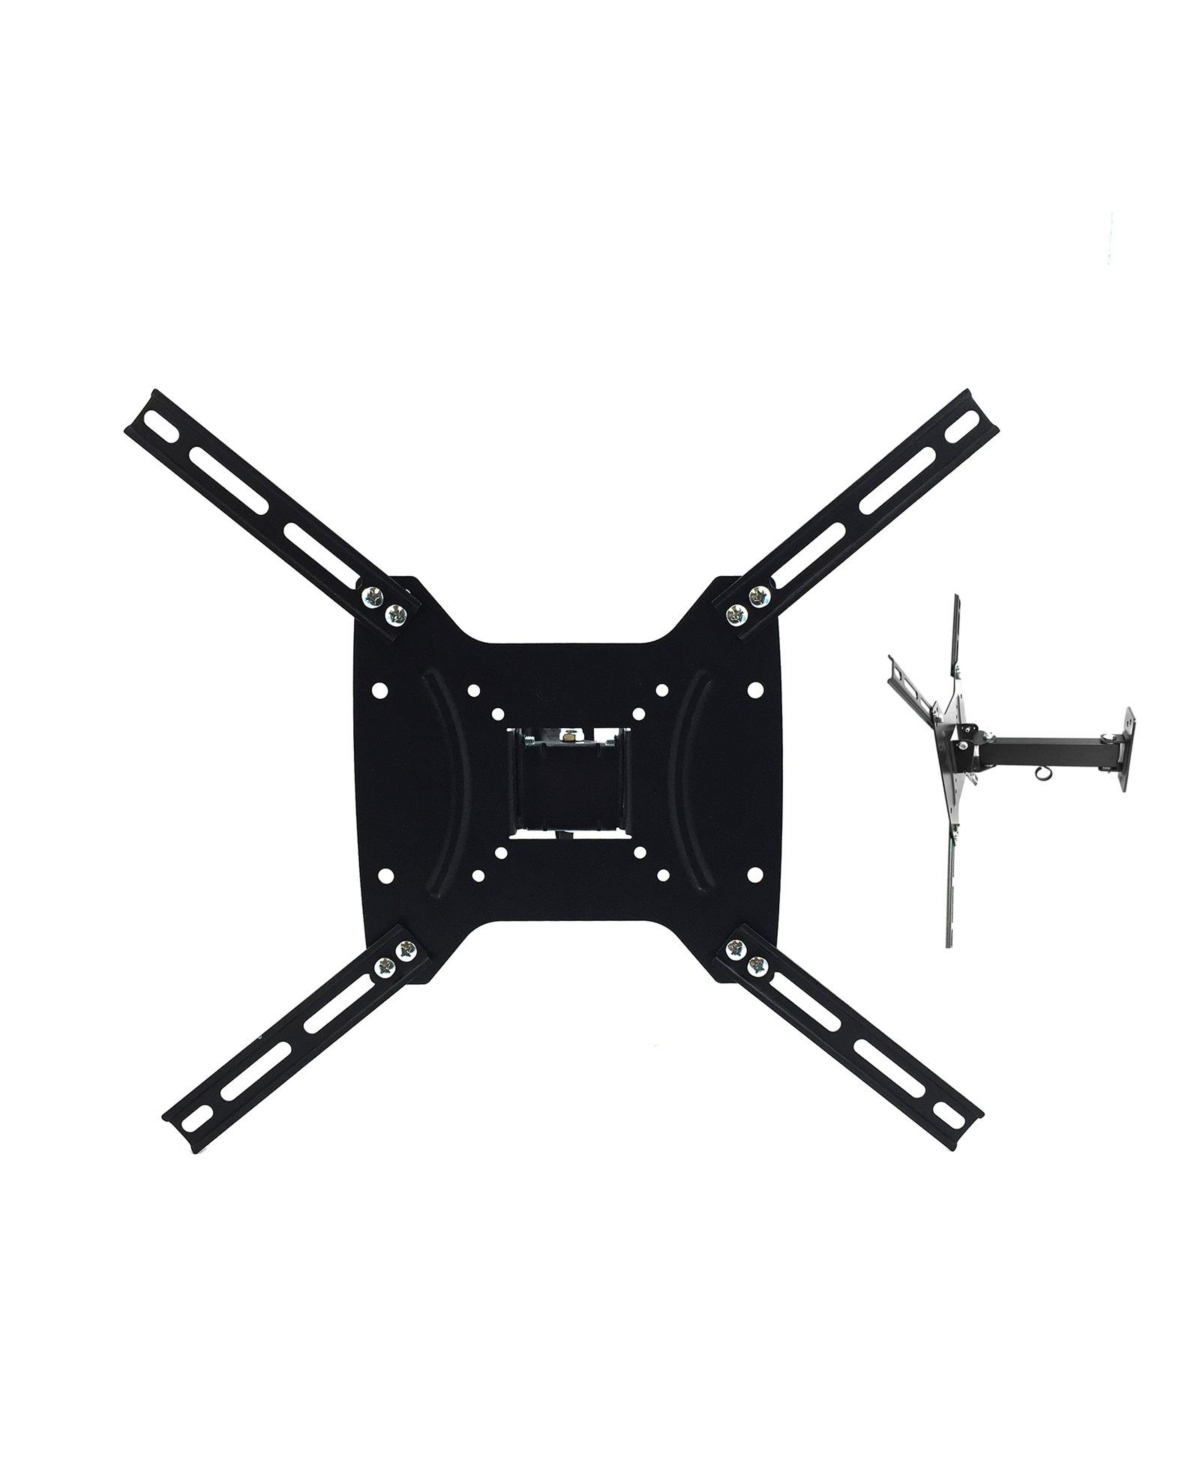 Versatile Full Motion Television Wall Mount for 17 - 55 Inch - Black